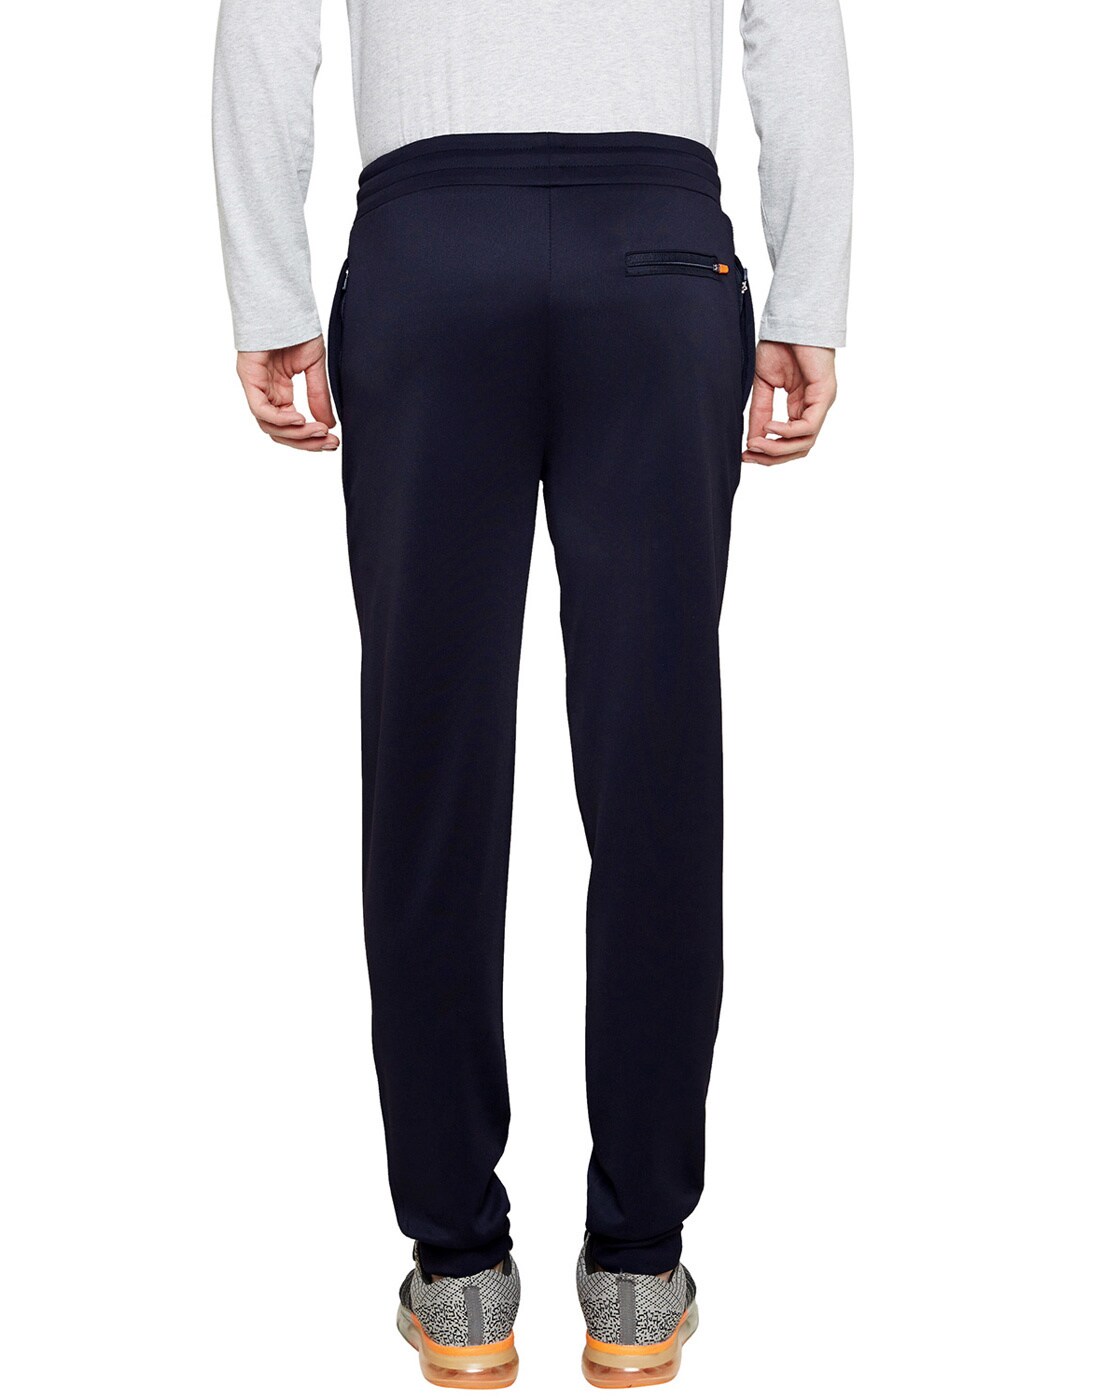 Buy BODYACTIVE Solid Color Mens Track Pants by Bodycare Black at Amazonin